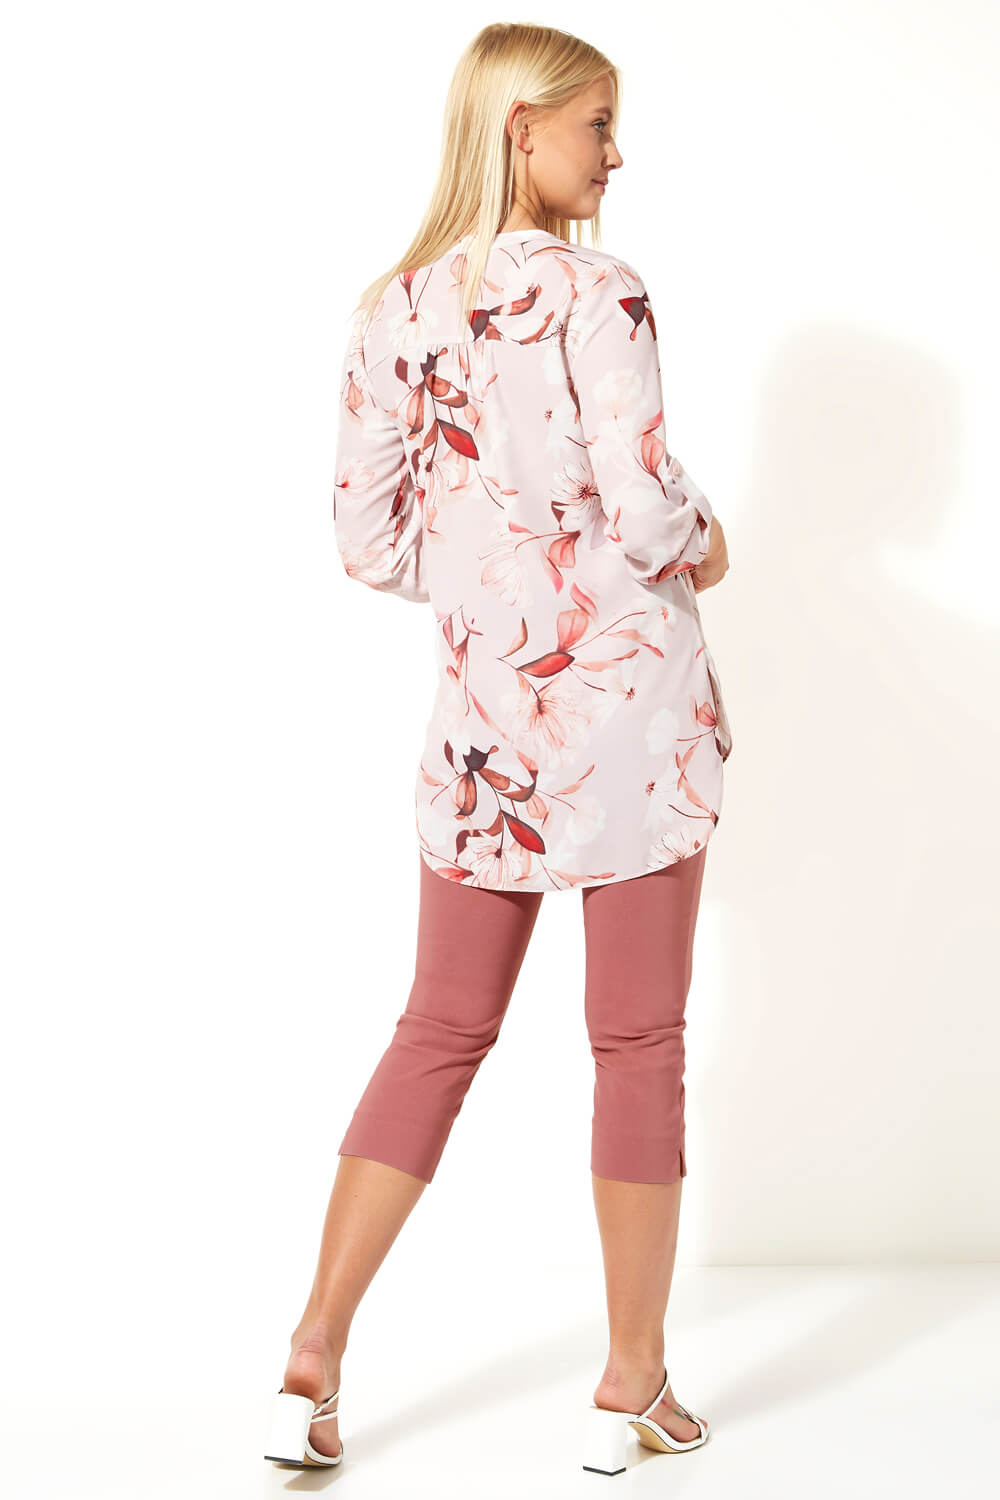 Light Pink Floral Print Roll Sleeve Shirt, Image 3 of 4